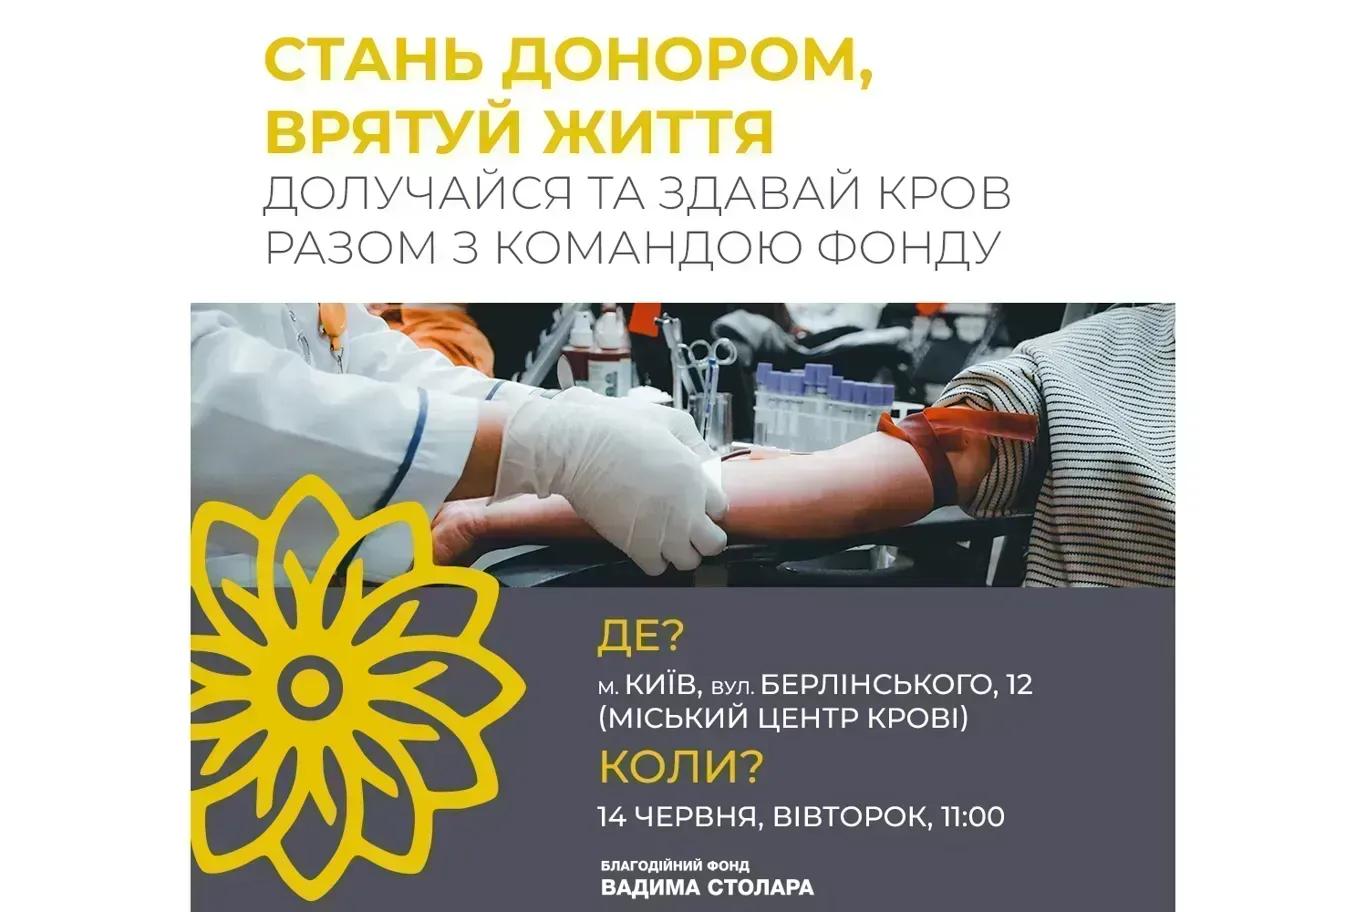 Volunteers call on Kyiv residents to donate blood for Donor Day